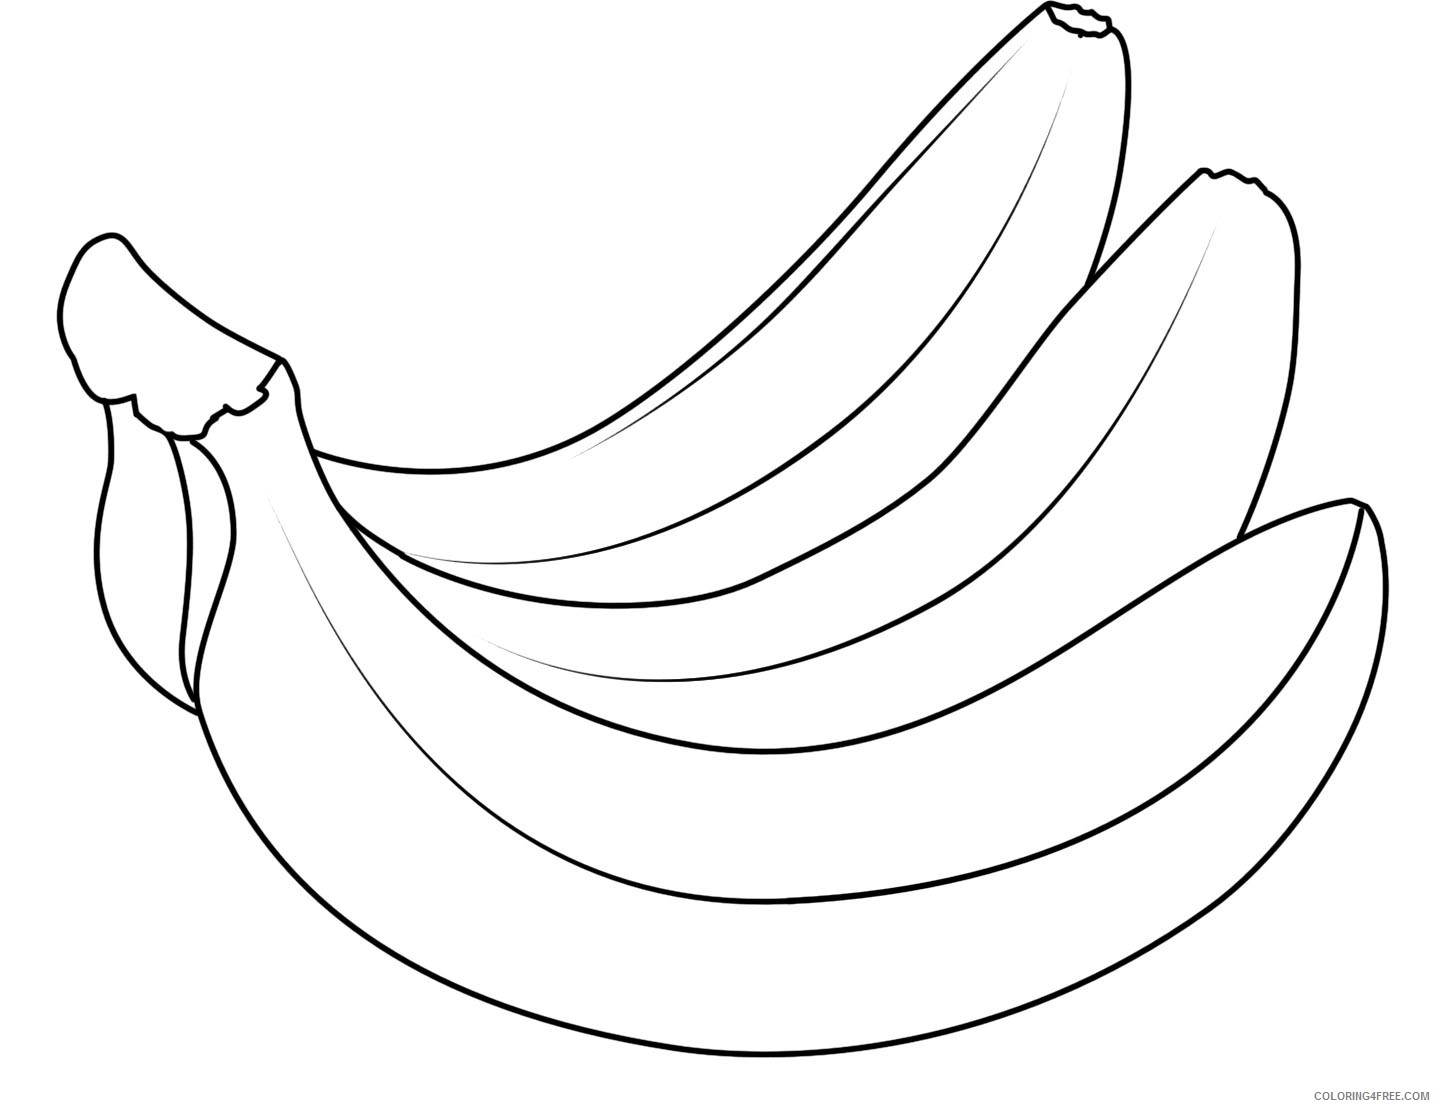 fruit coloring pages banana Coloring4free